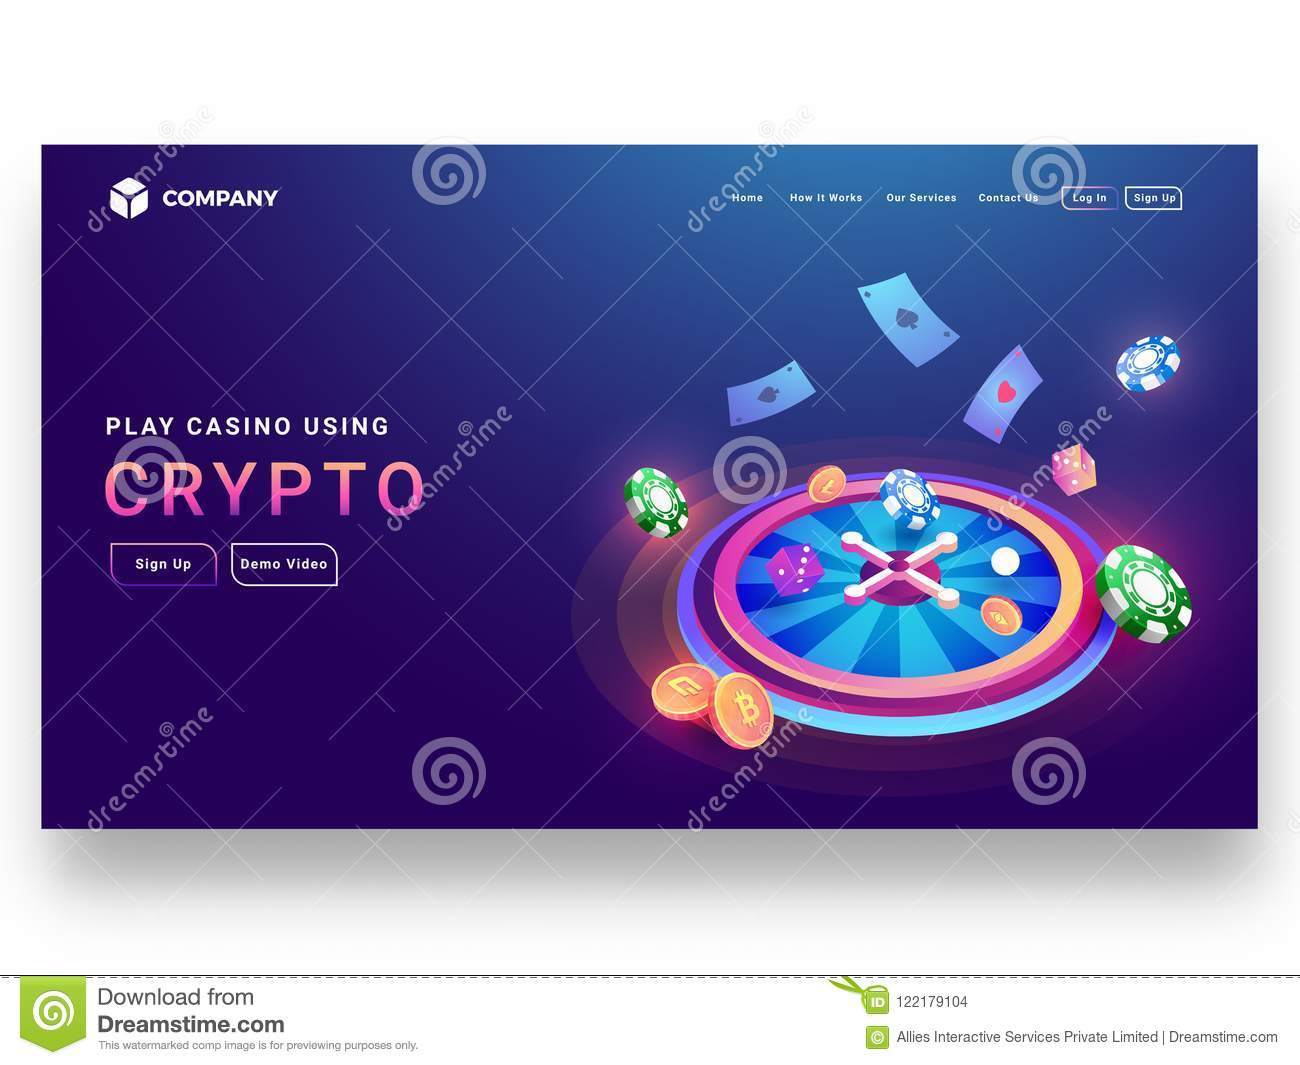 2_crypto-casino-concept-isometric-design-roulette-wheel-di-dice-poker-chip-coins-playing-cards-sign-up-page-website-122179104